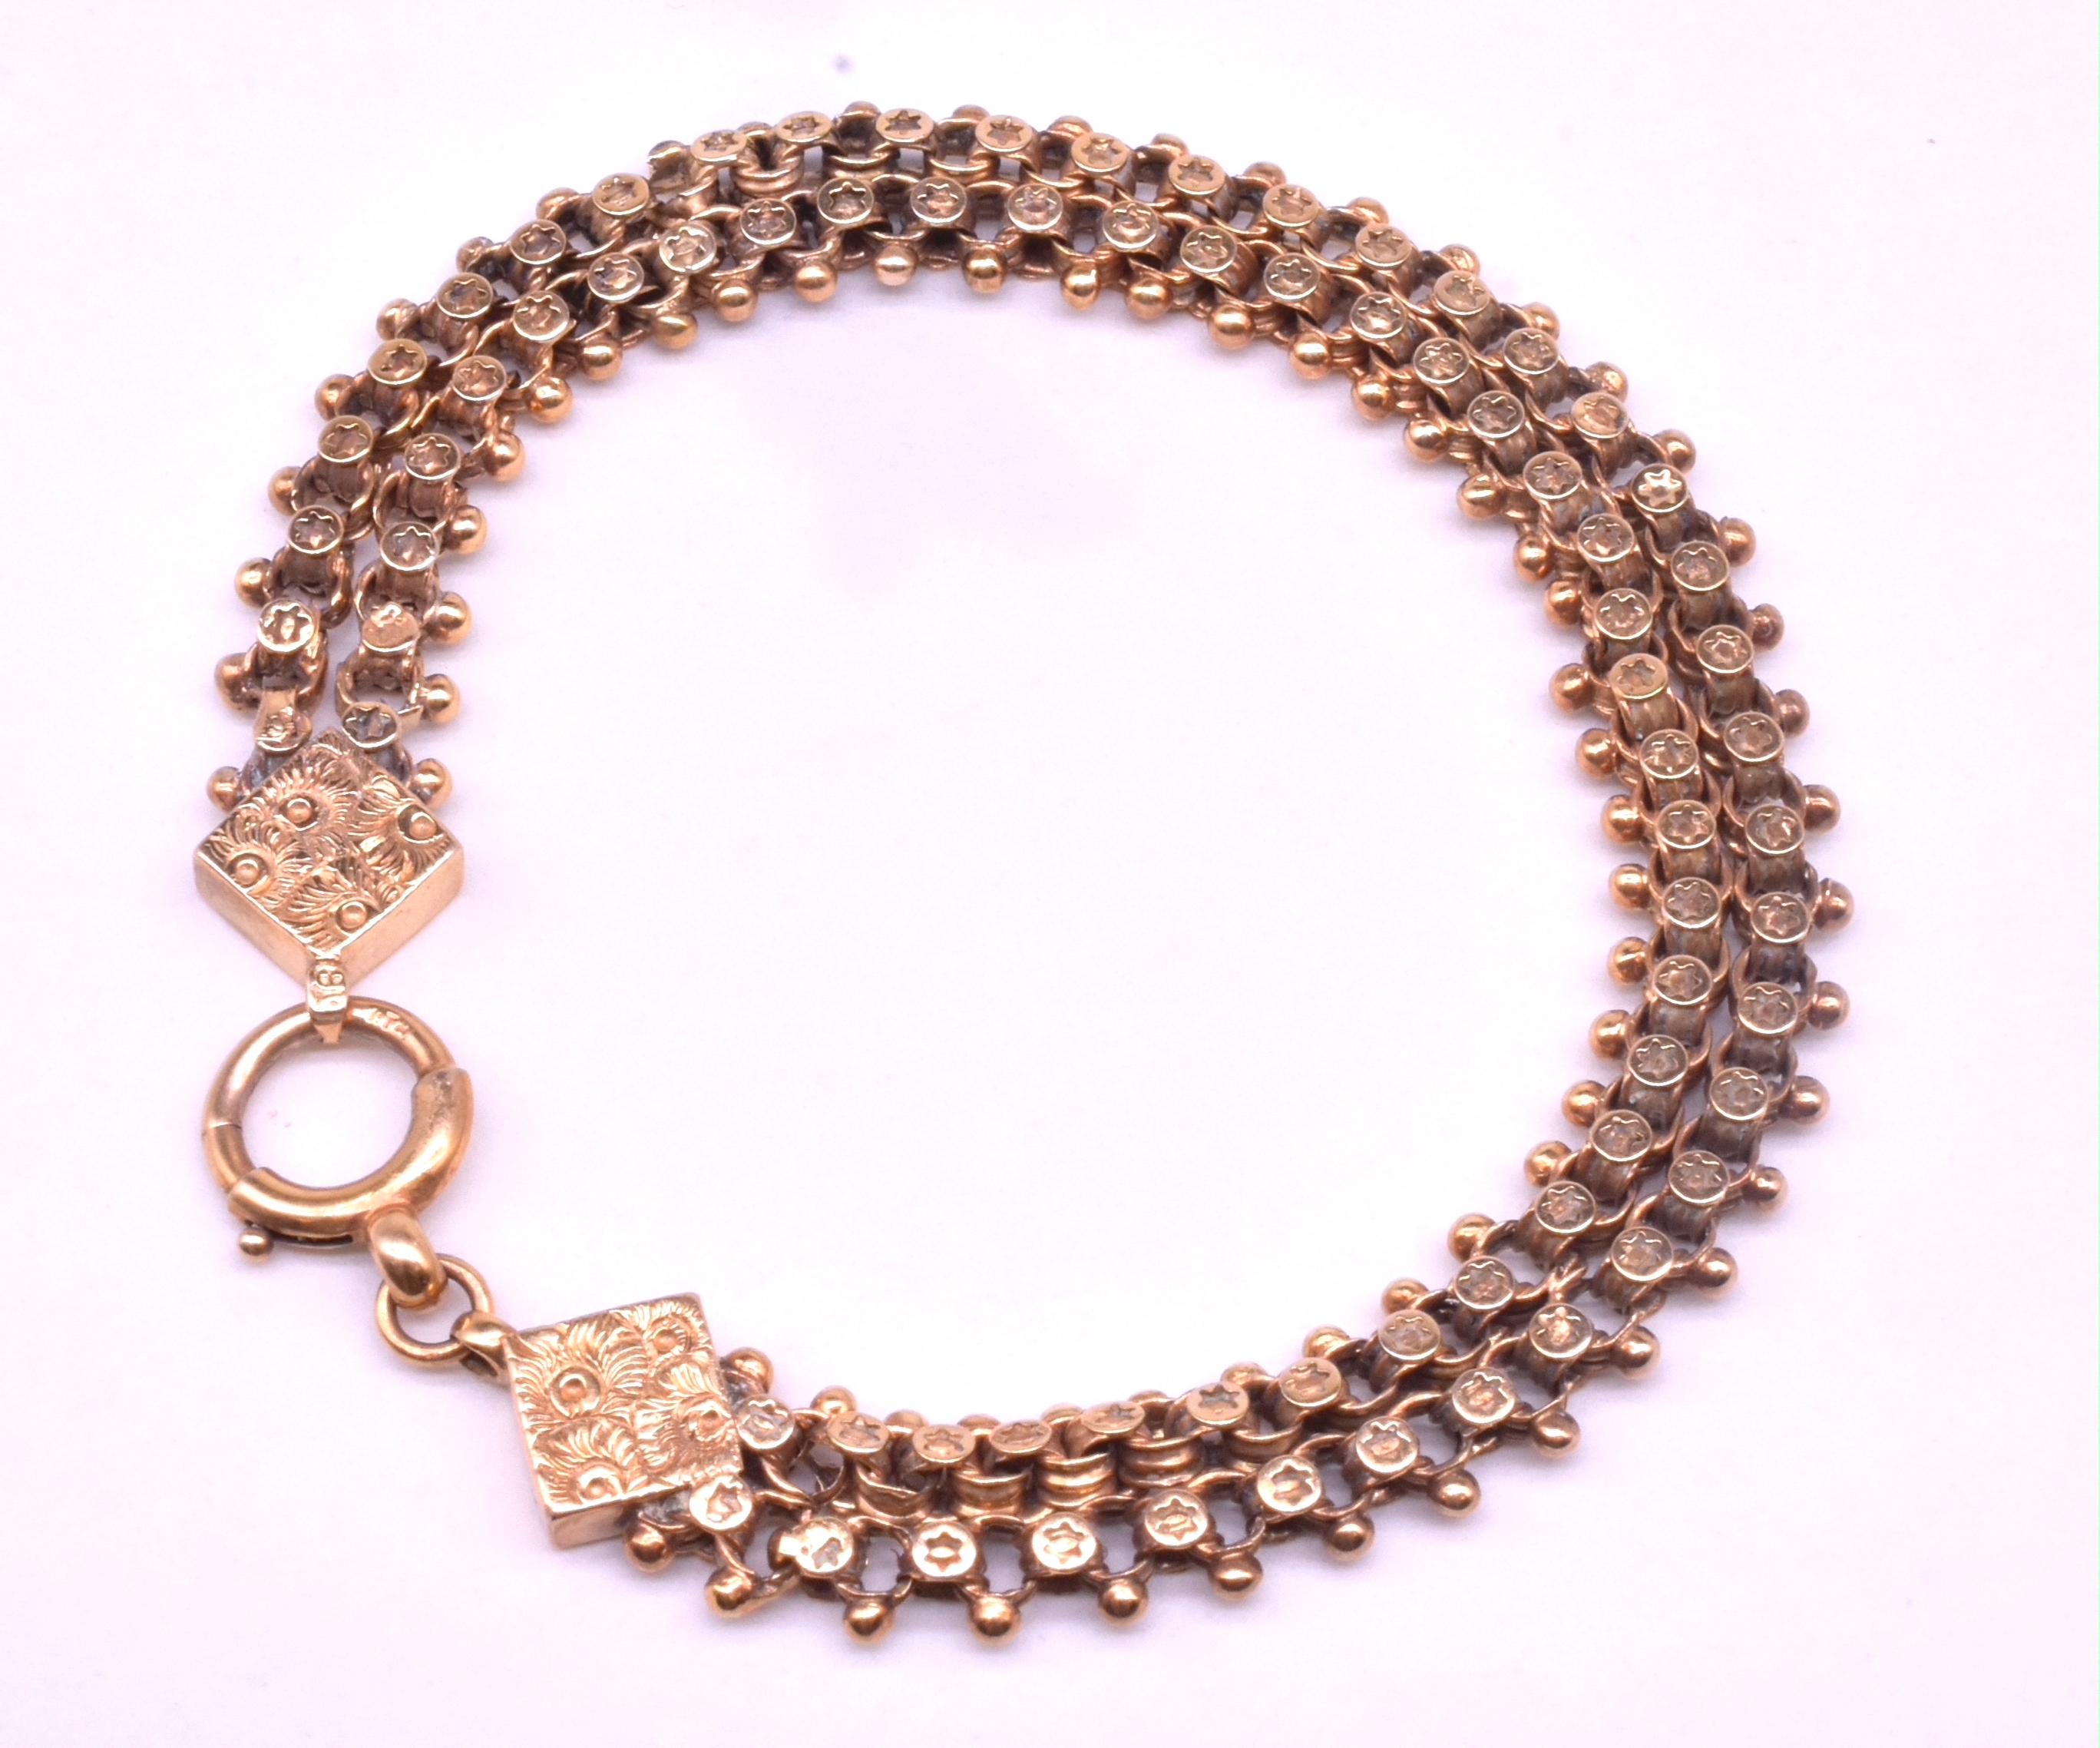 Our star stamped chain link bracelet is made up of two strands of 9 carat gold chains set parallel to each other and soldered together in at three places along the length of the bracelet, which gives it movement. The bracelet has small round links